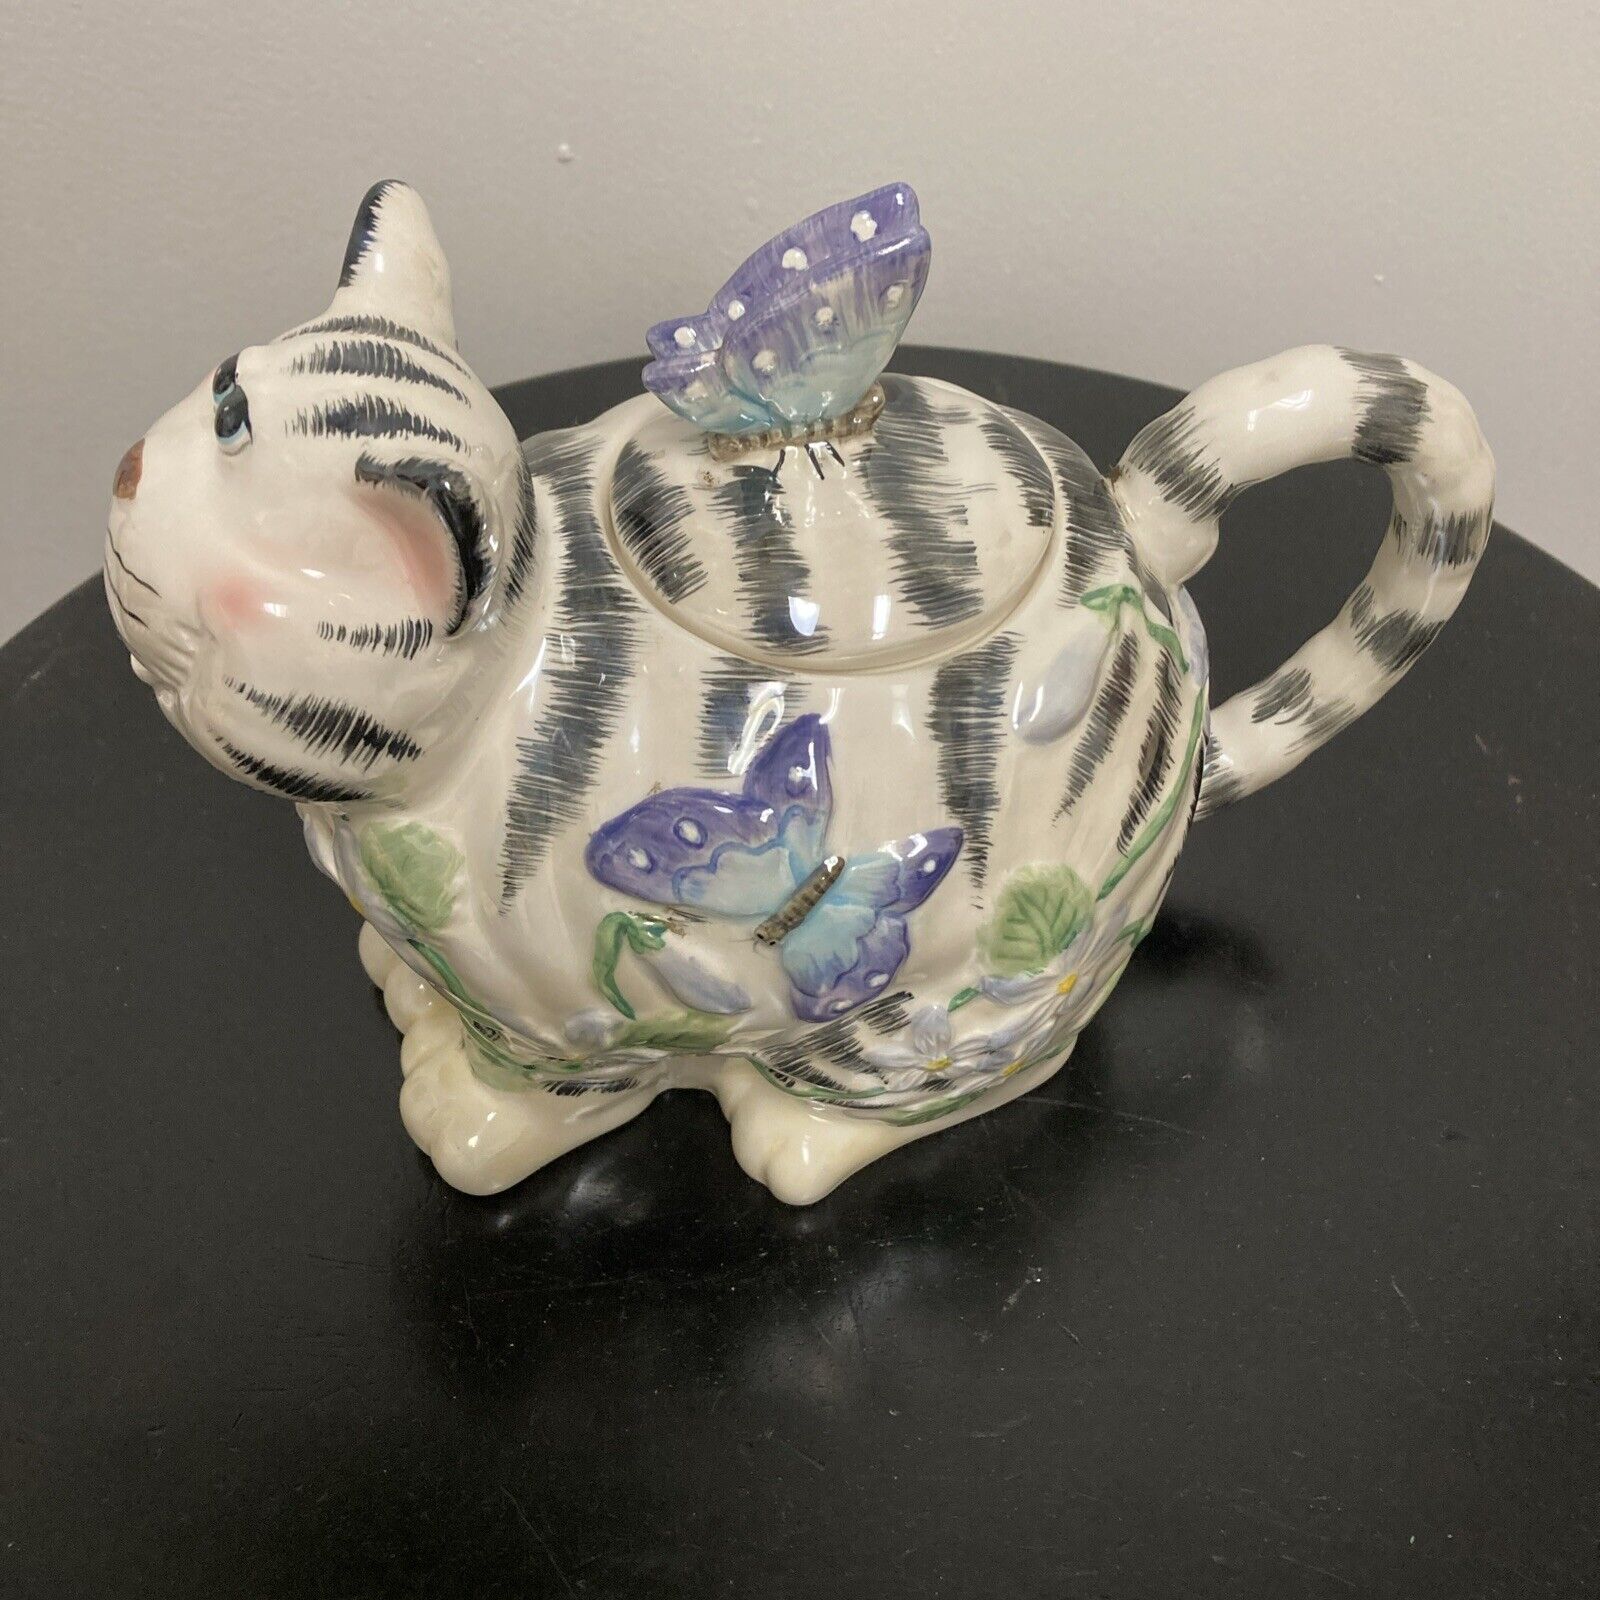 Ceramic Iridescent Cat Teapot Whimsical Striped Butterfly Flowers Decor